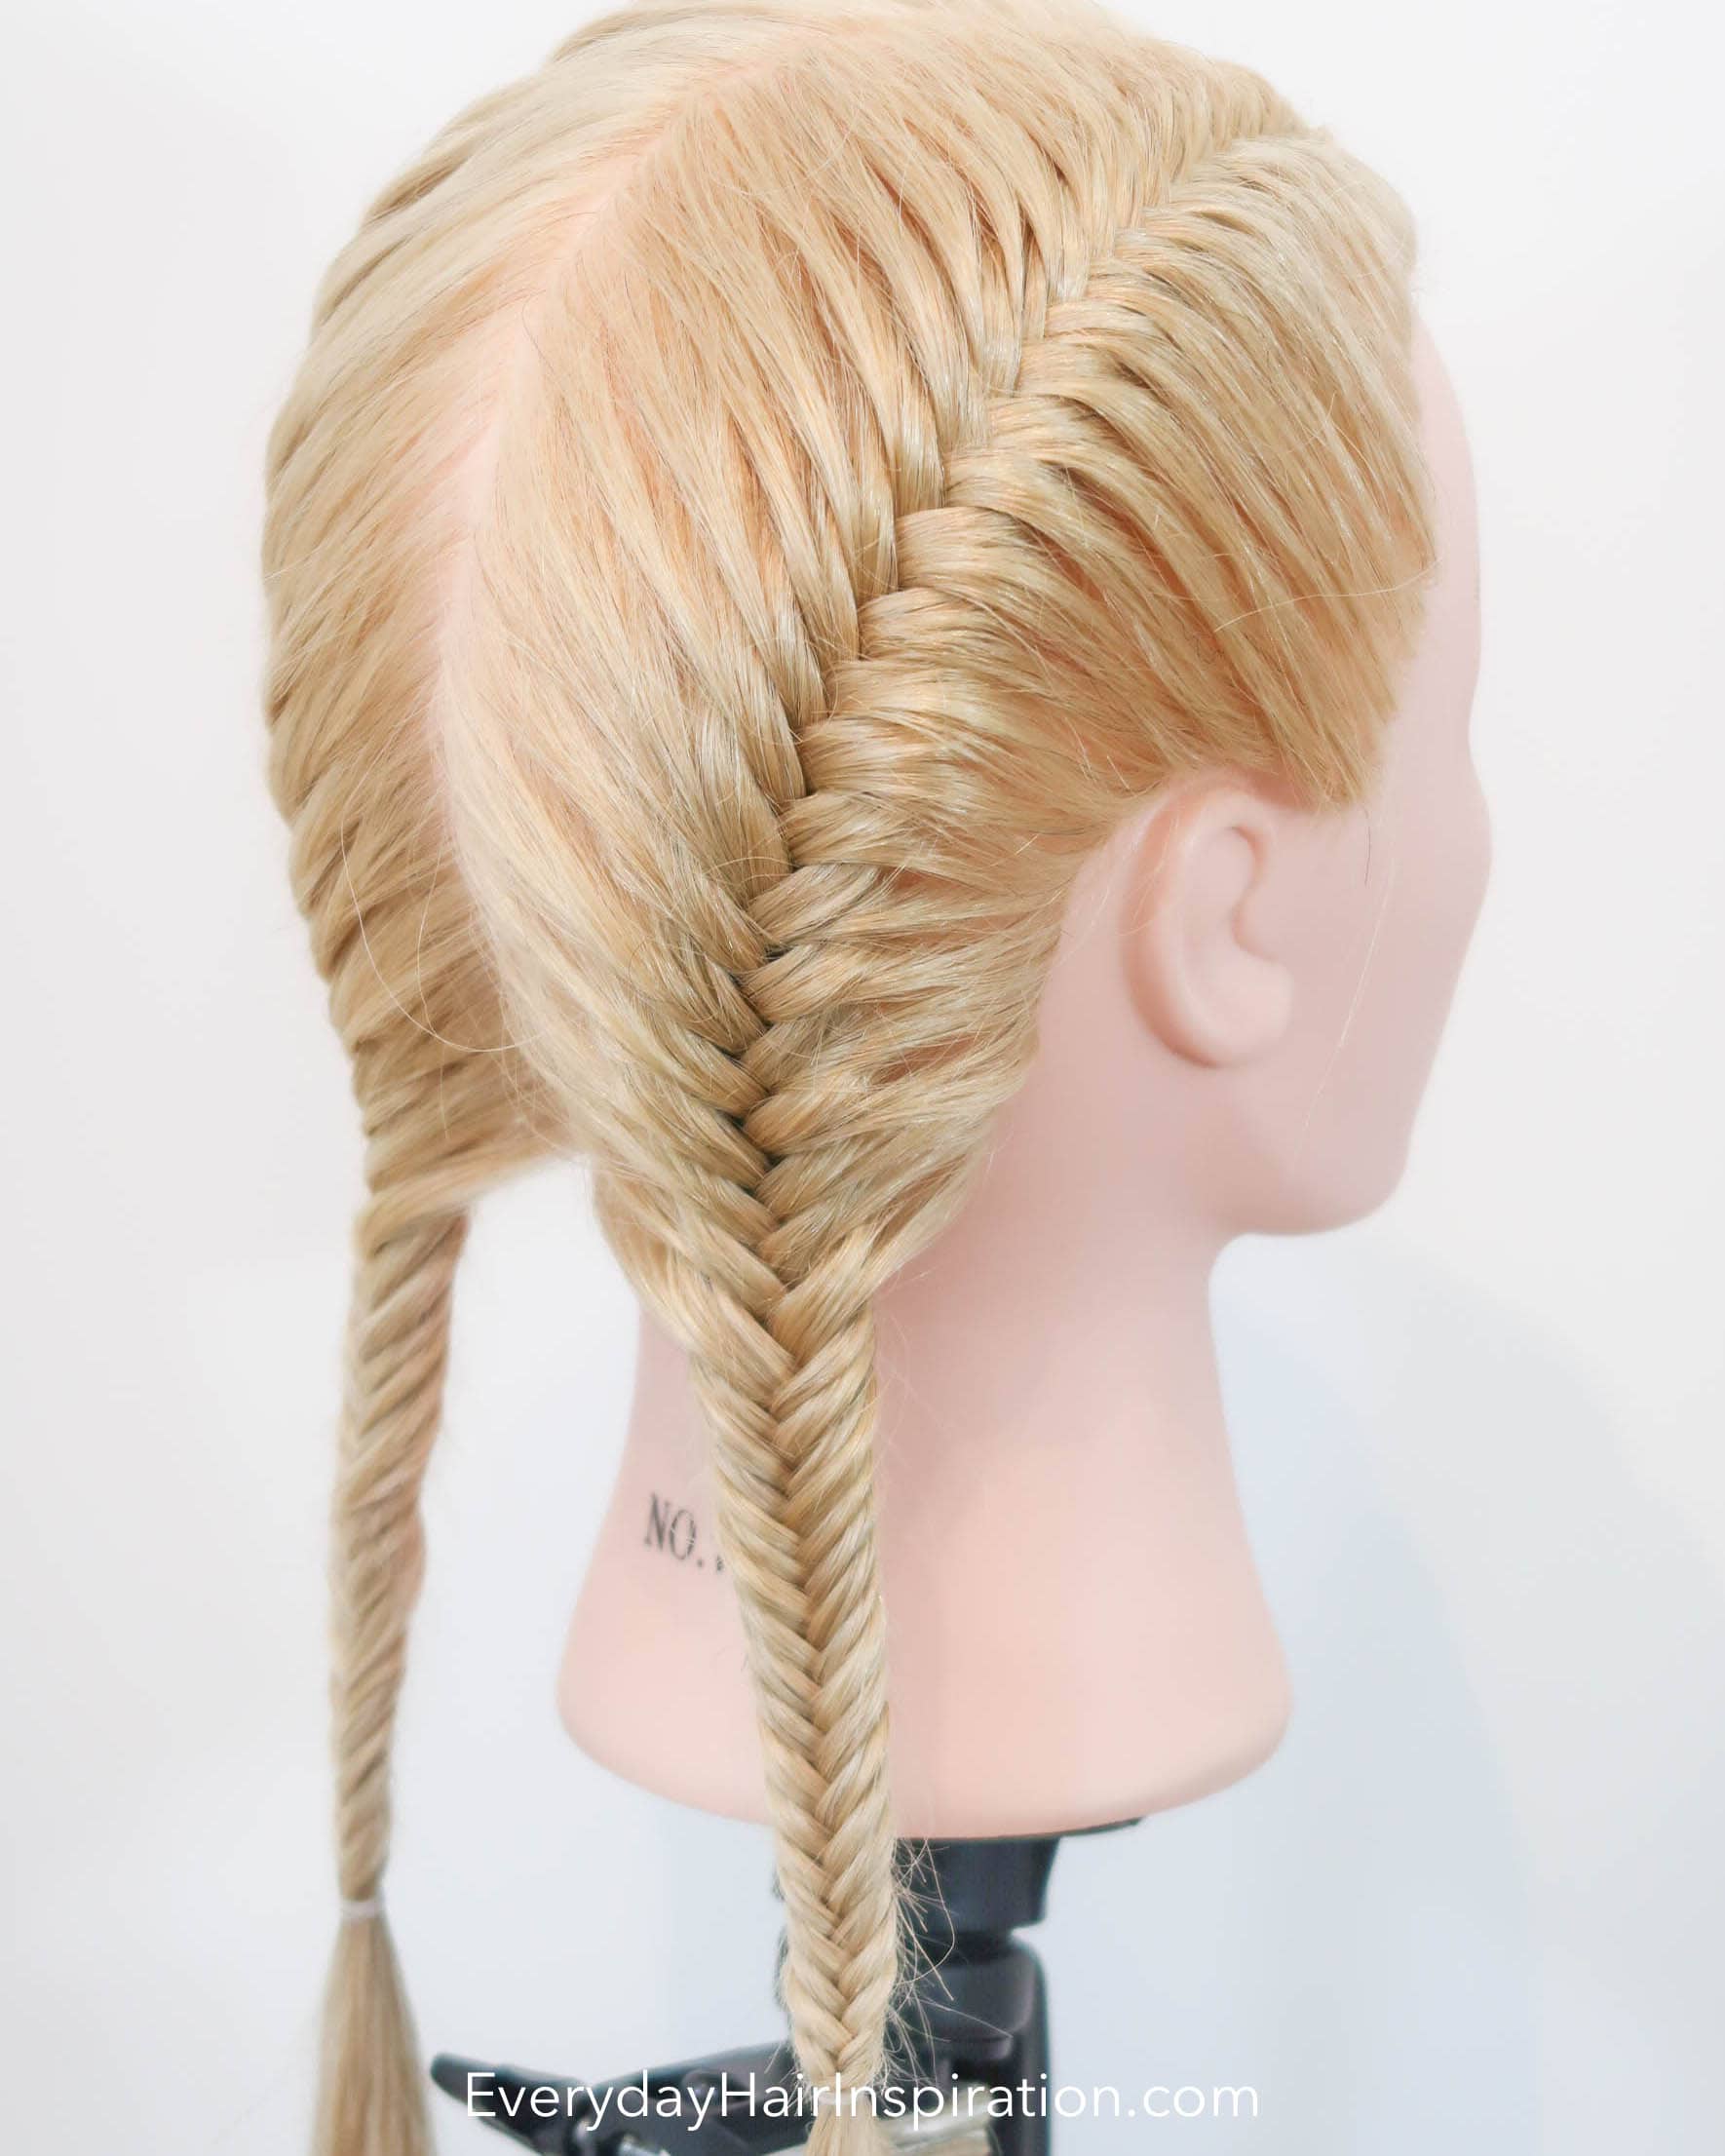 Double French Fishtail Braid Step By Step Guide - Everyday Hair